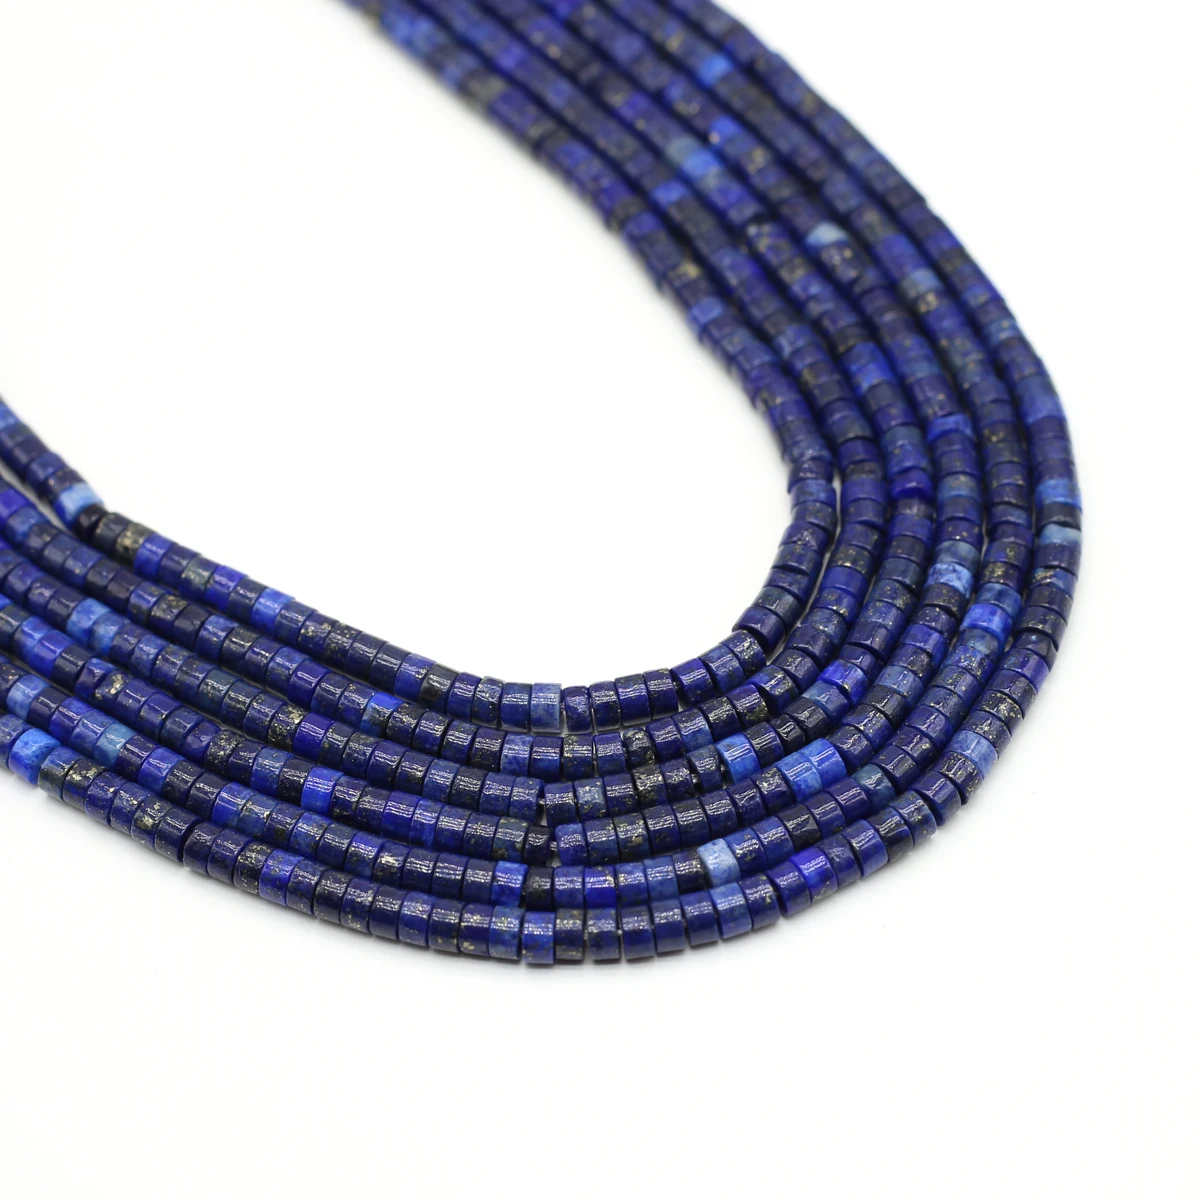 

Faceted Natural Stone lapis lazuli Beads 2x4mm Cylindrical Punch Loose Spacer Beads for Jewelry Making DIY Necklace Accessorie